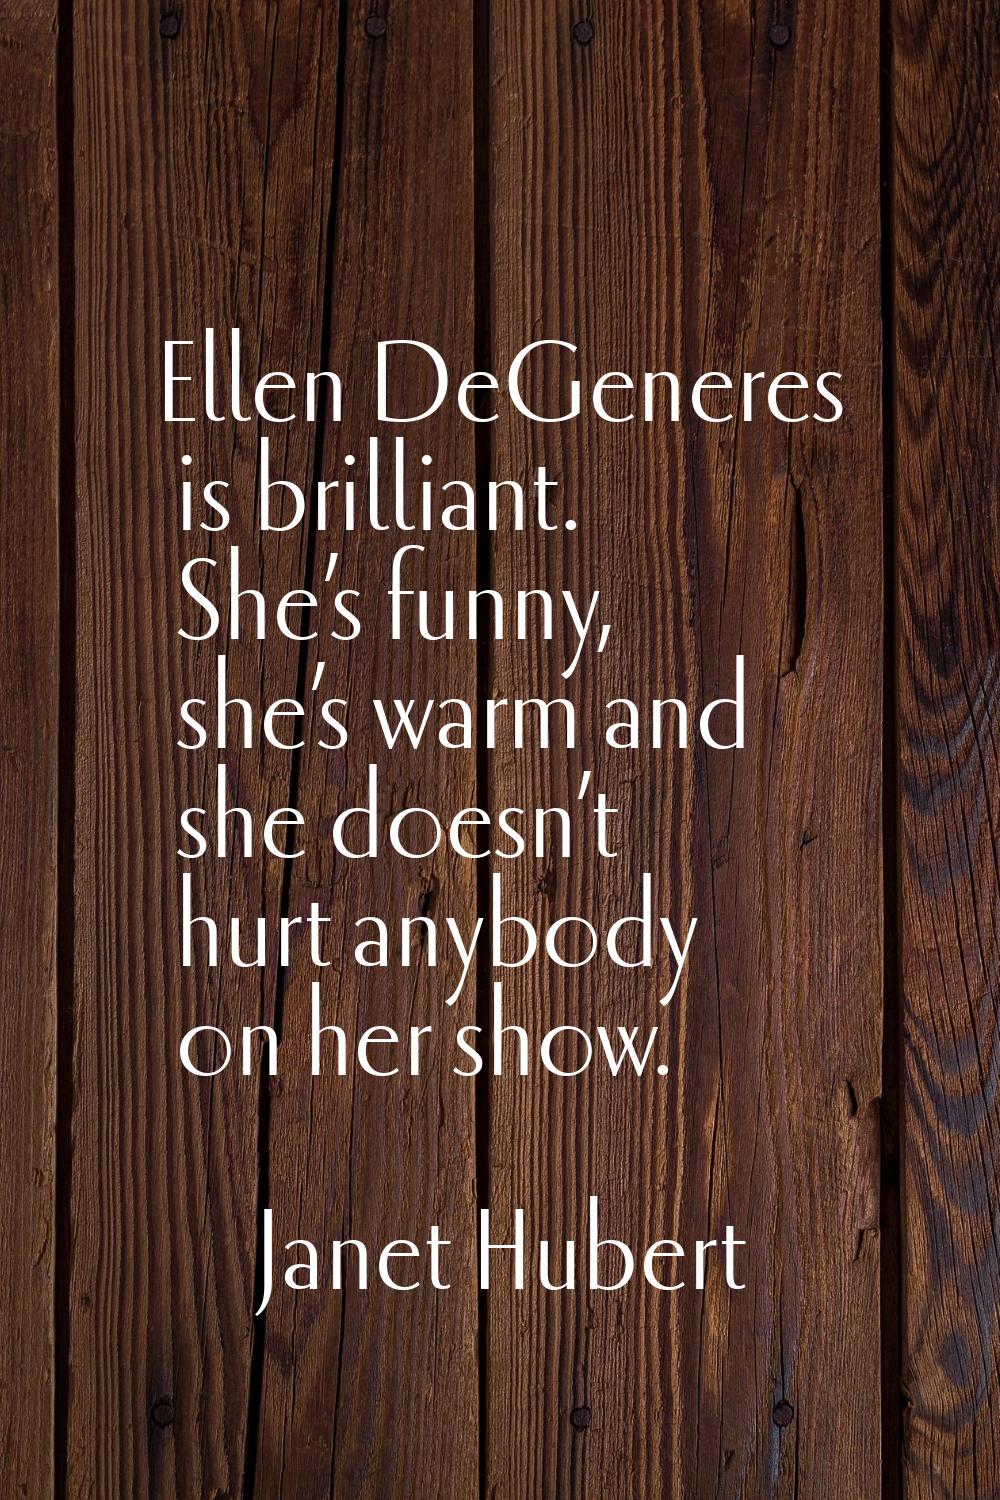 Ellen DeGeneres is brilliant. She’s funny, she’s warm and she doesn’t hurt anybody on her show.